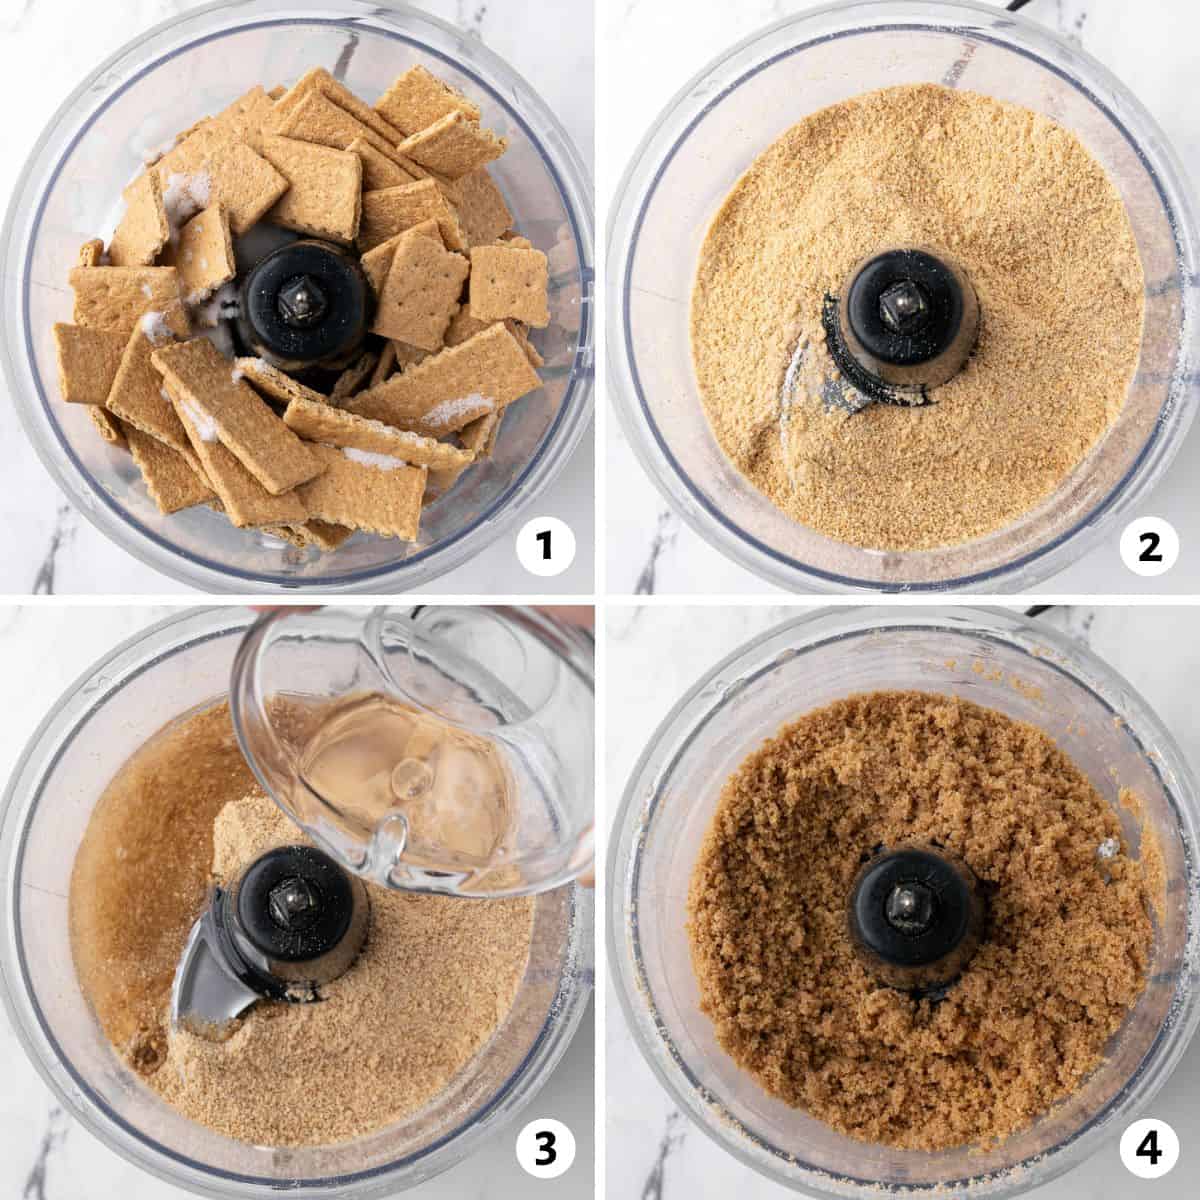 4 iamge collage making crust in a food processor: graham crackers and sugar added, 2- after pulsing into fine crumbs, 3- coconut oil being added, 4- after fully combined.